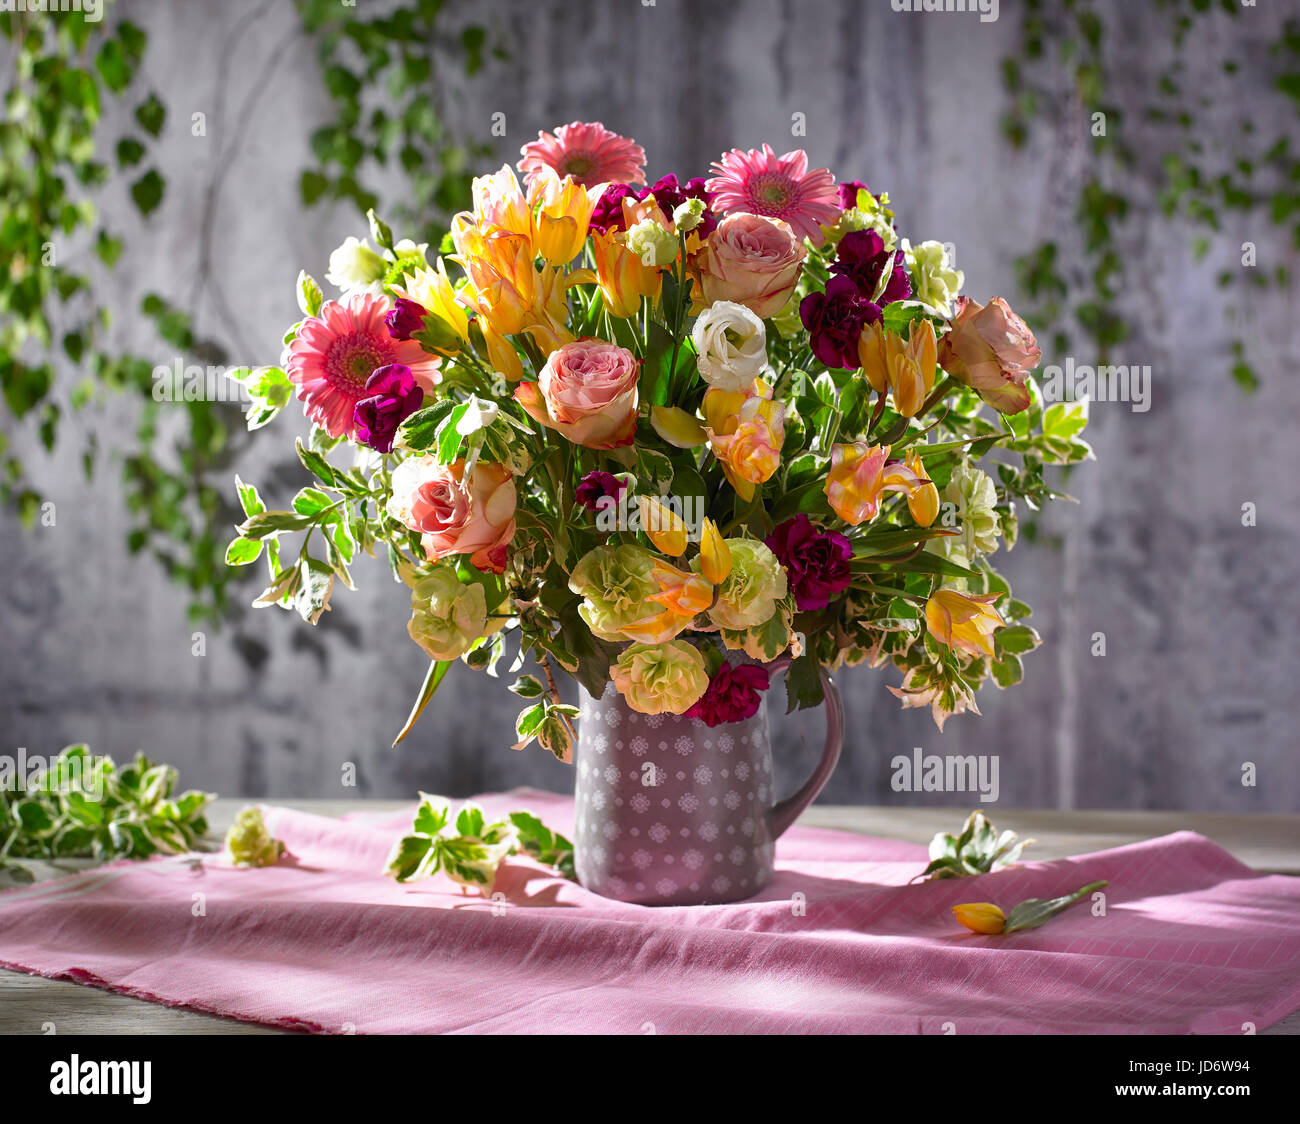 Bouquet of flowers with roses, gerbaras. Stock Photo